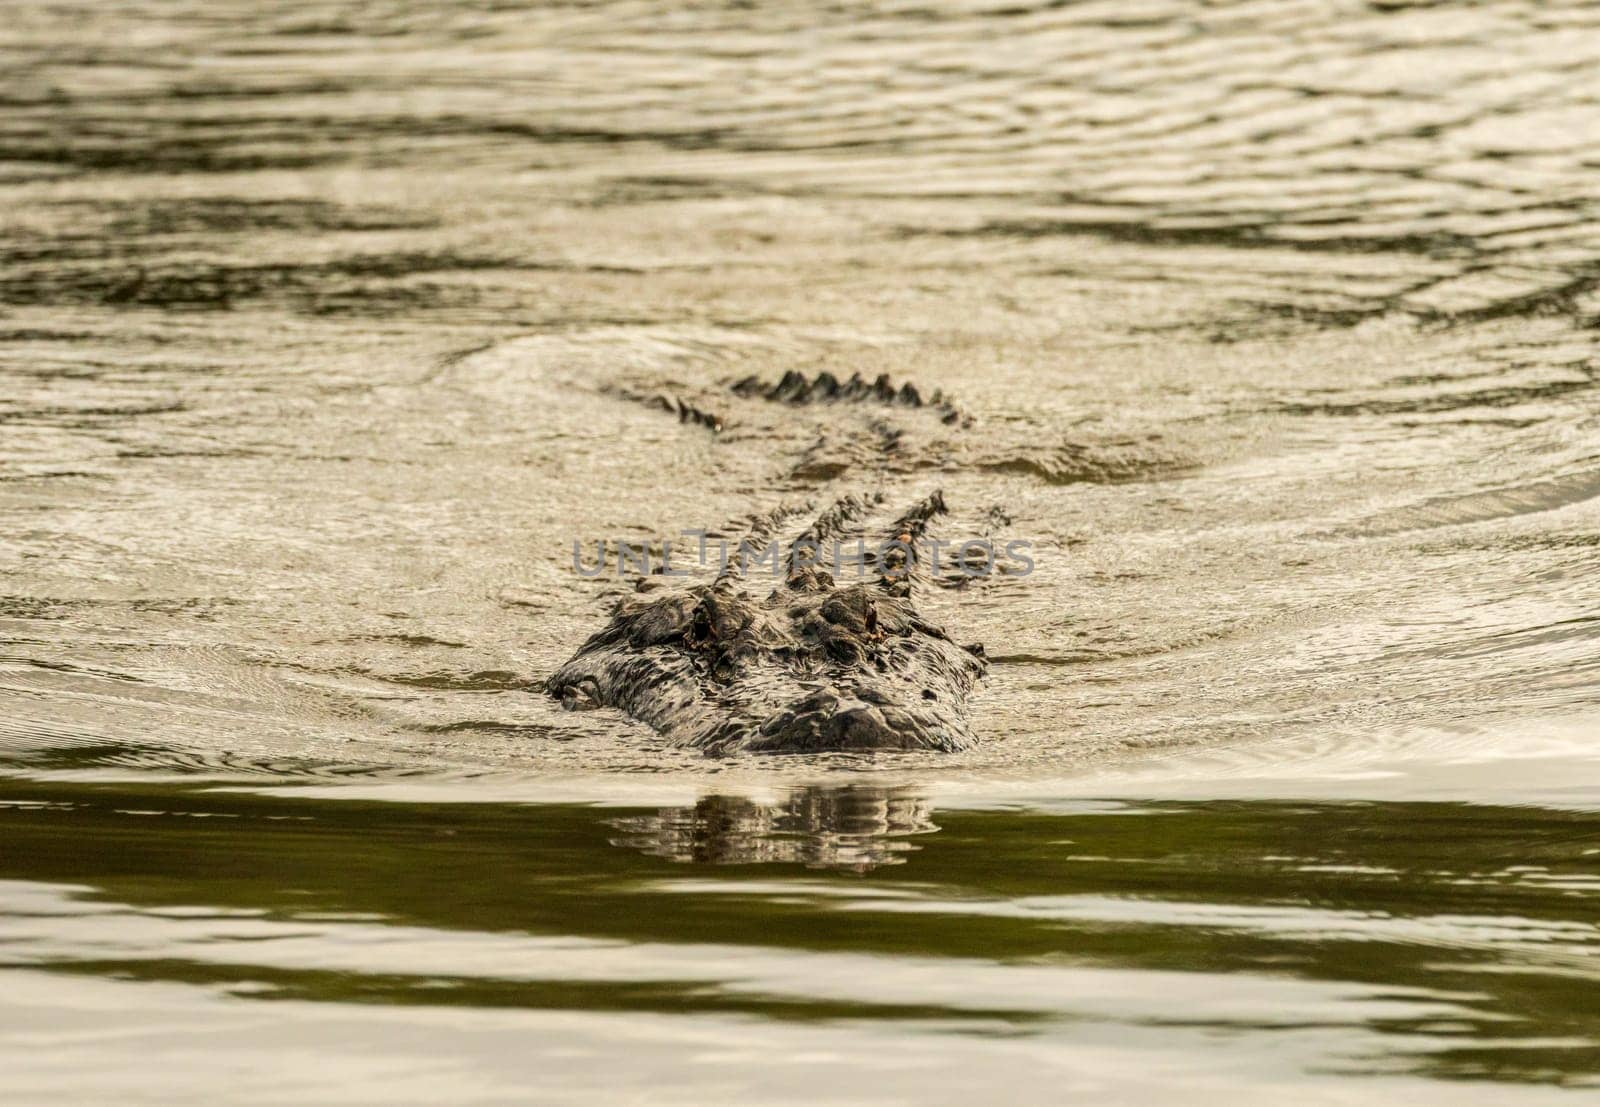 American alligator approaching across calm waters of Atchafalaya basin by steheap